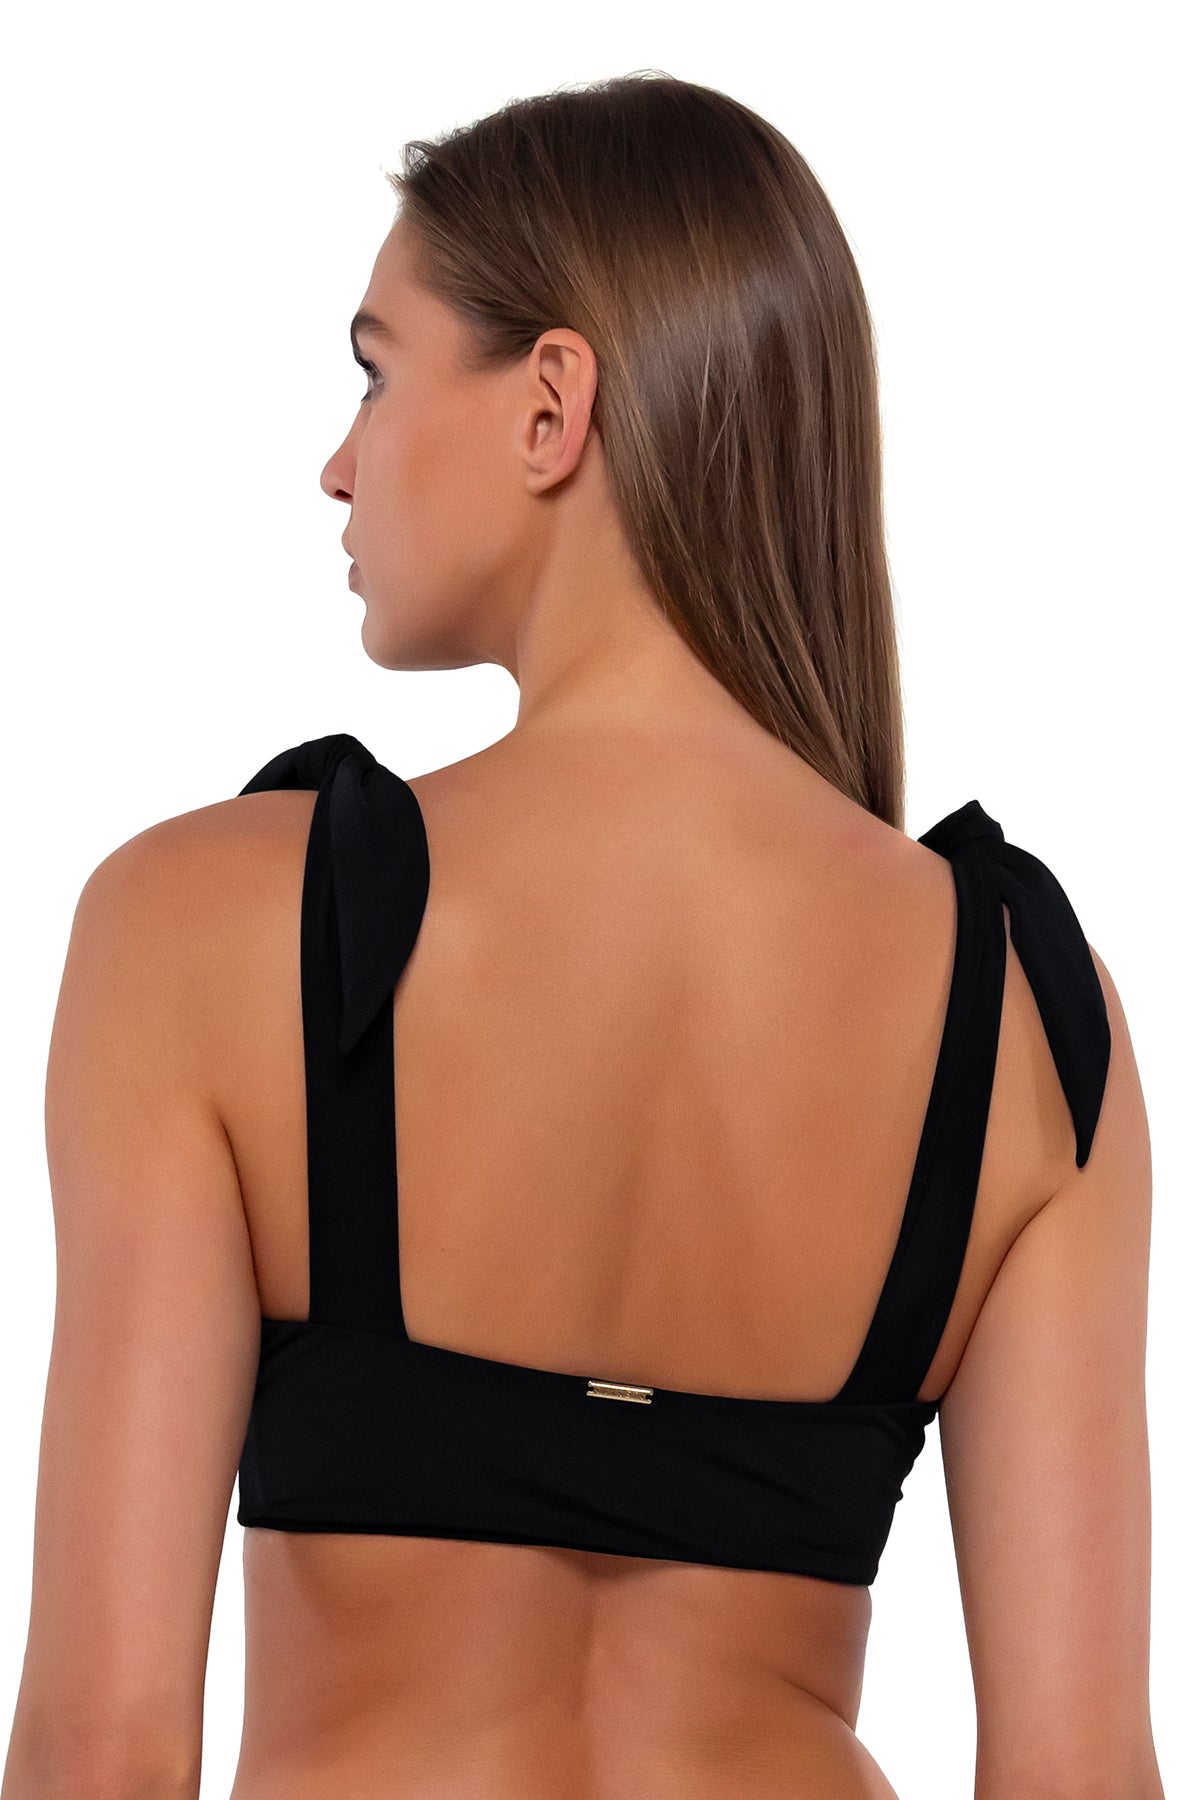 Back pose #1 of Daria wearing Sunsets Black Lily Top